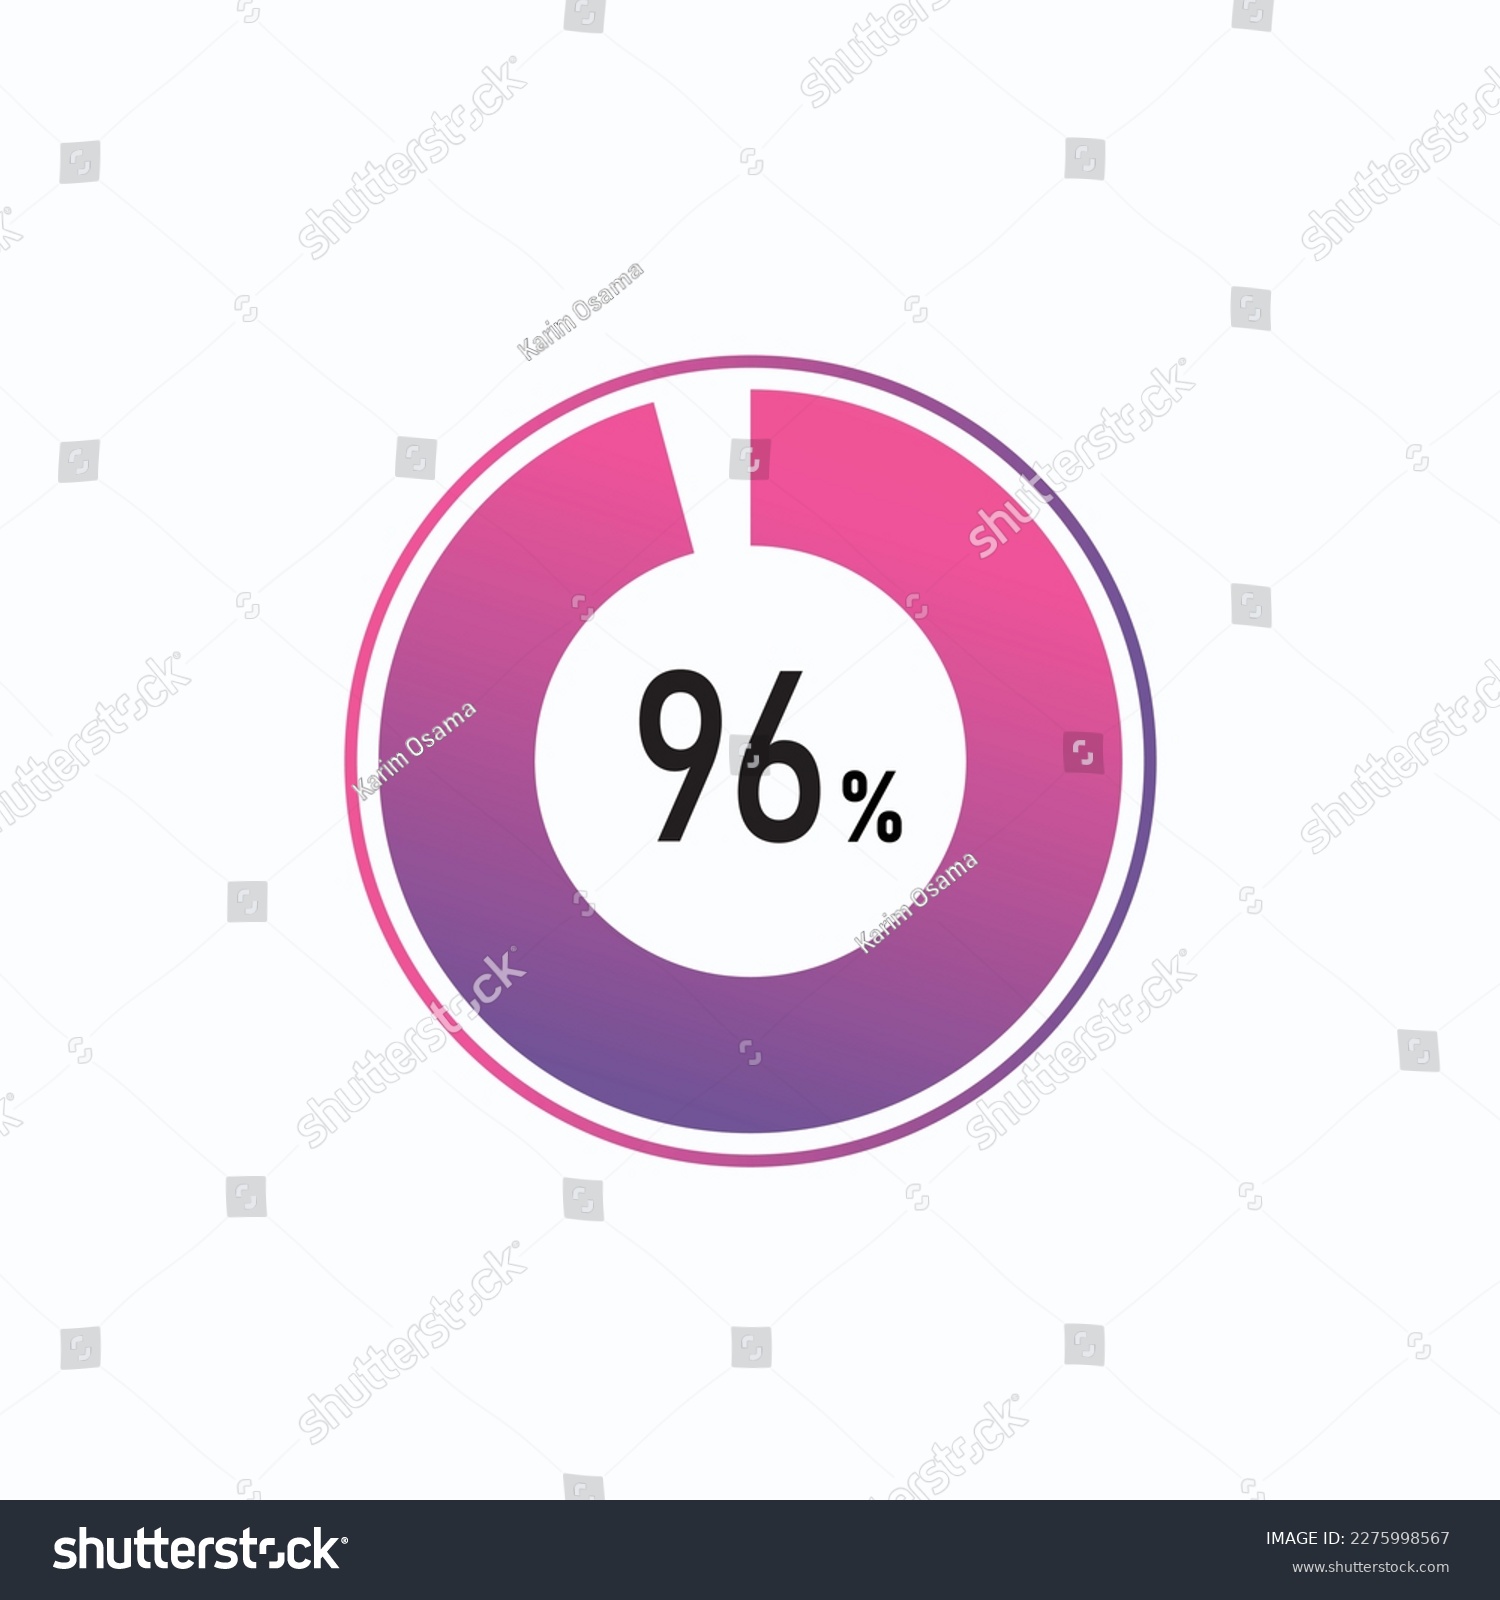 SVG of 96 percents pie chart infographic elements. 96% percentage infographic circle icons for download, illustration, business, web design. svg